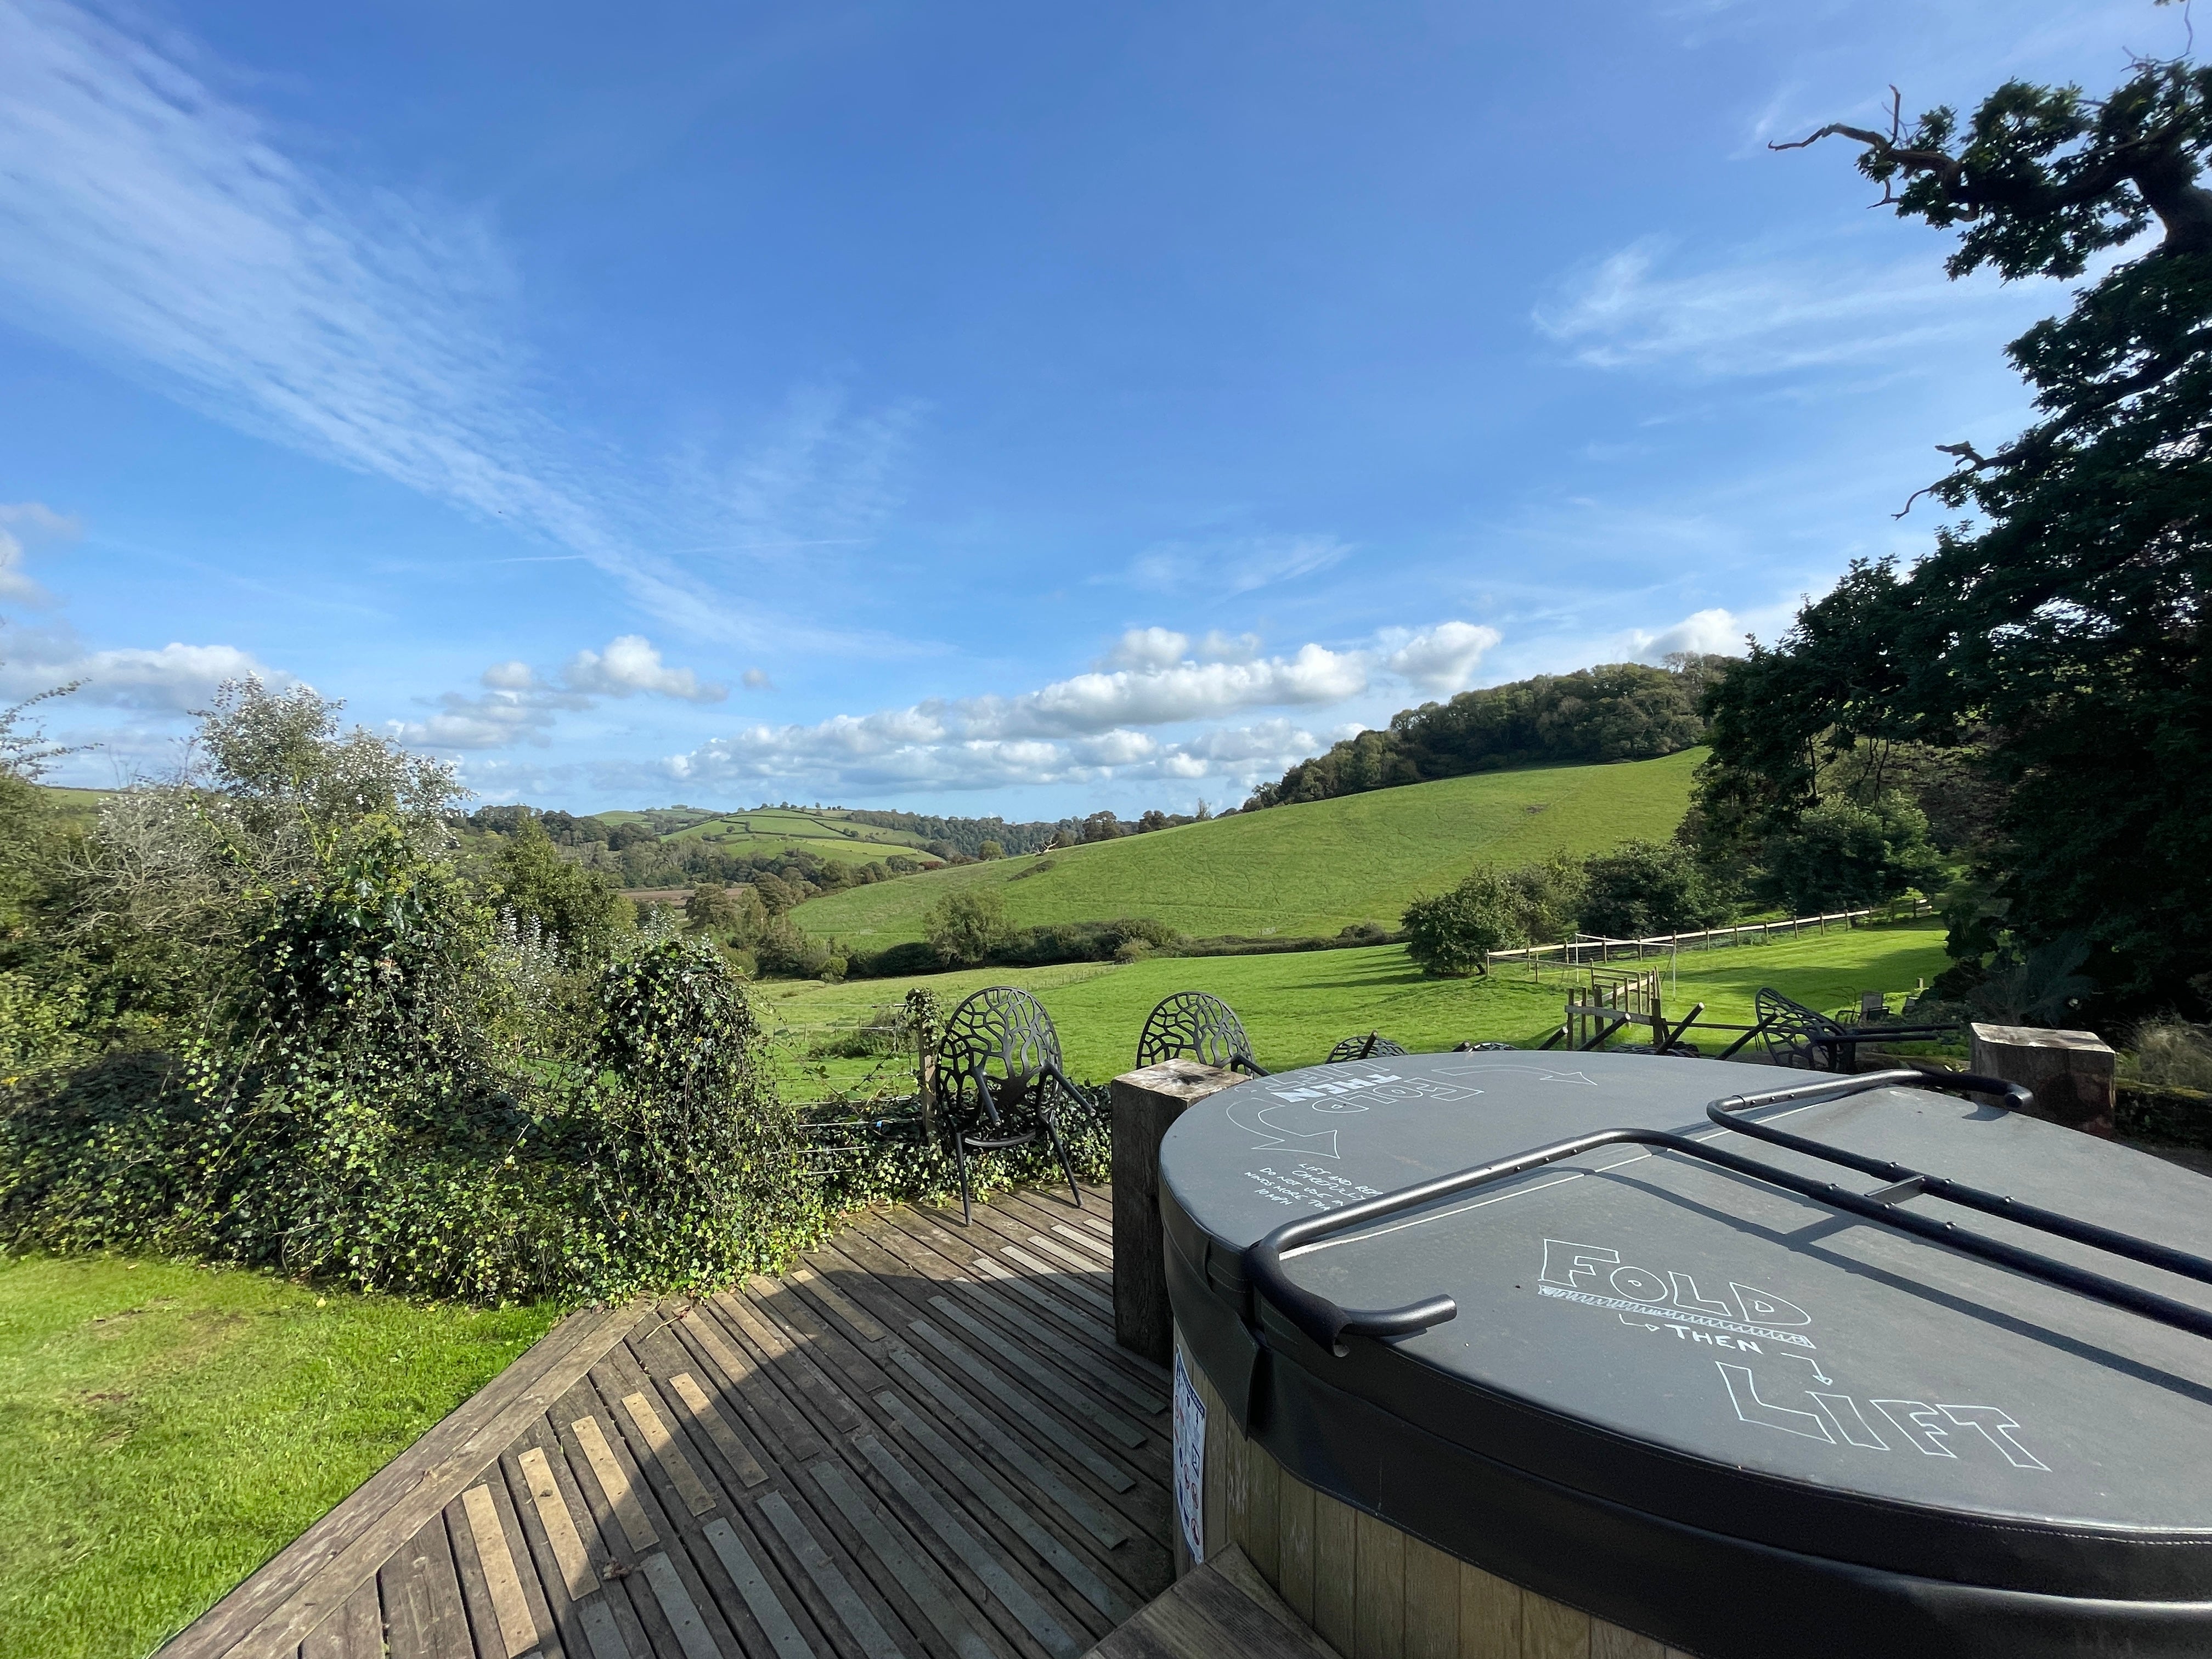 Hot tub with a view at our sewing retreat in Devon